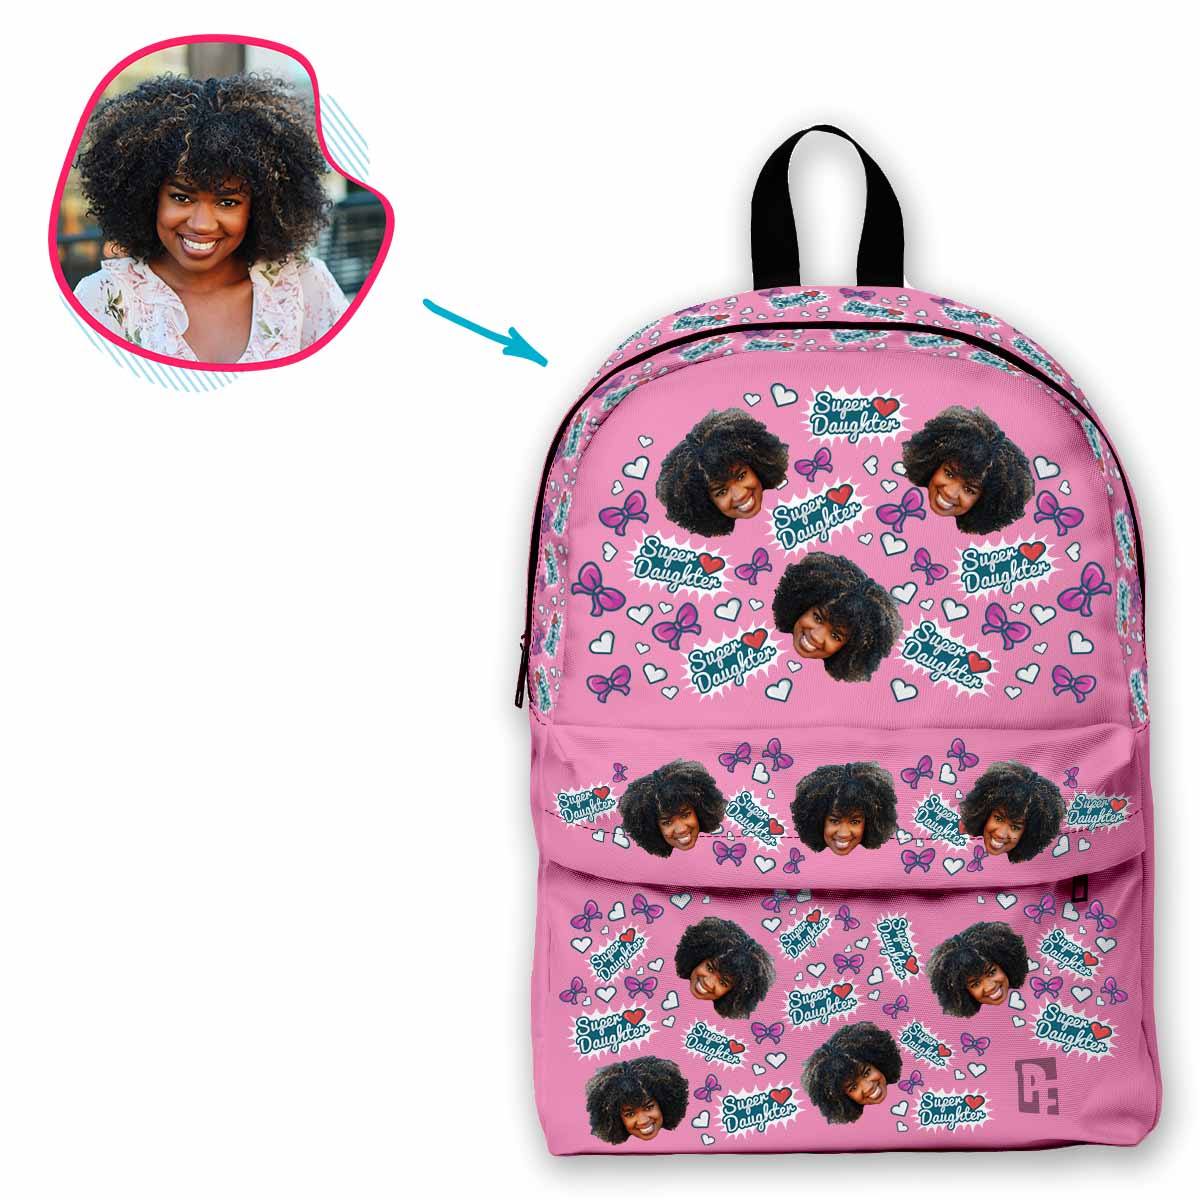 pink Super Daughter classic backpack personalized with photo of face printed on it